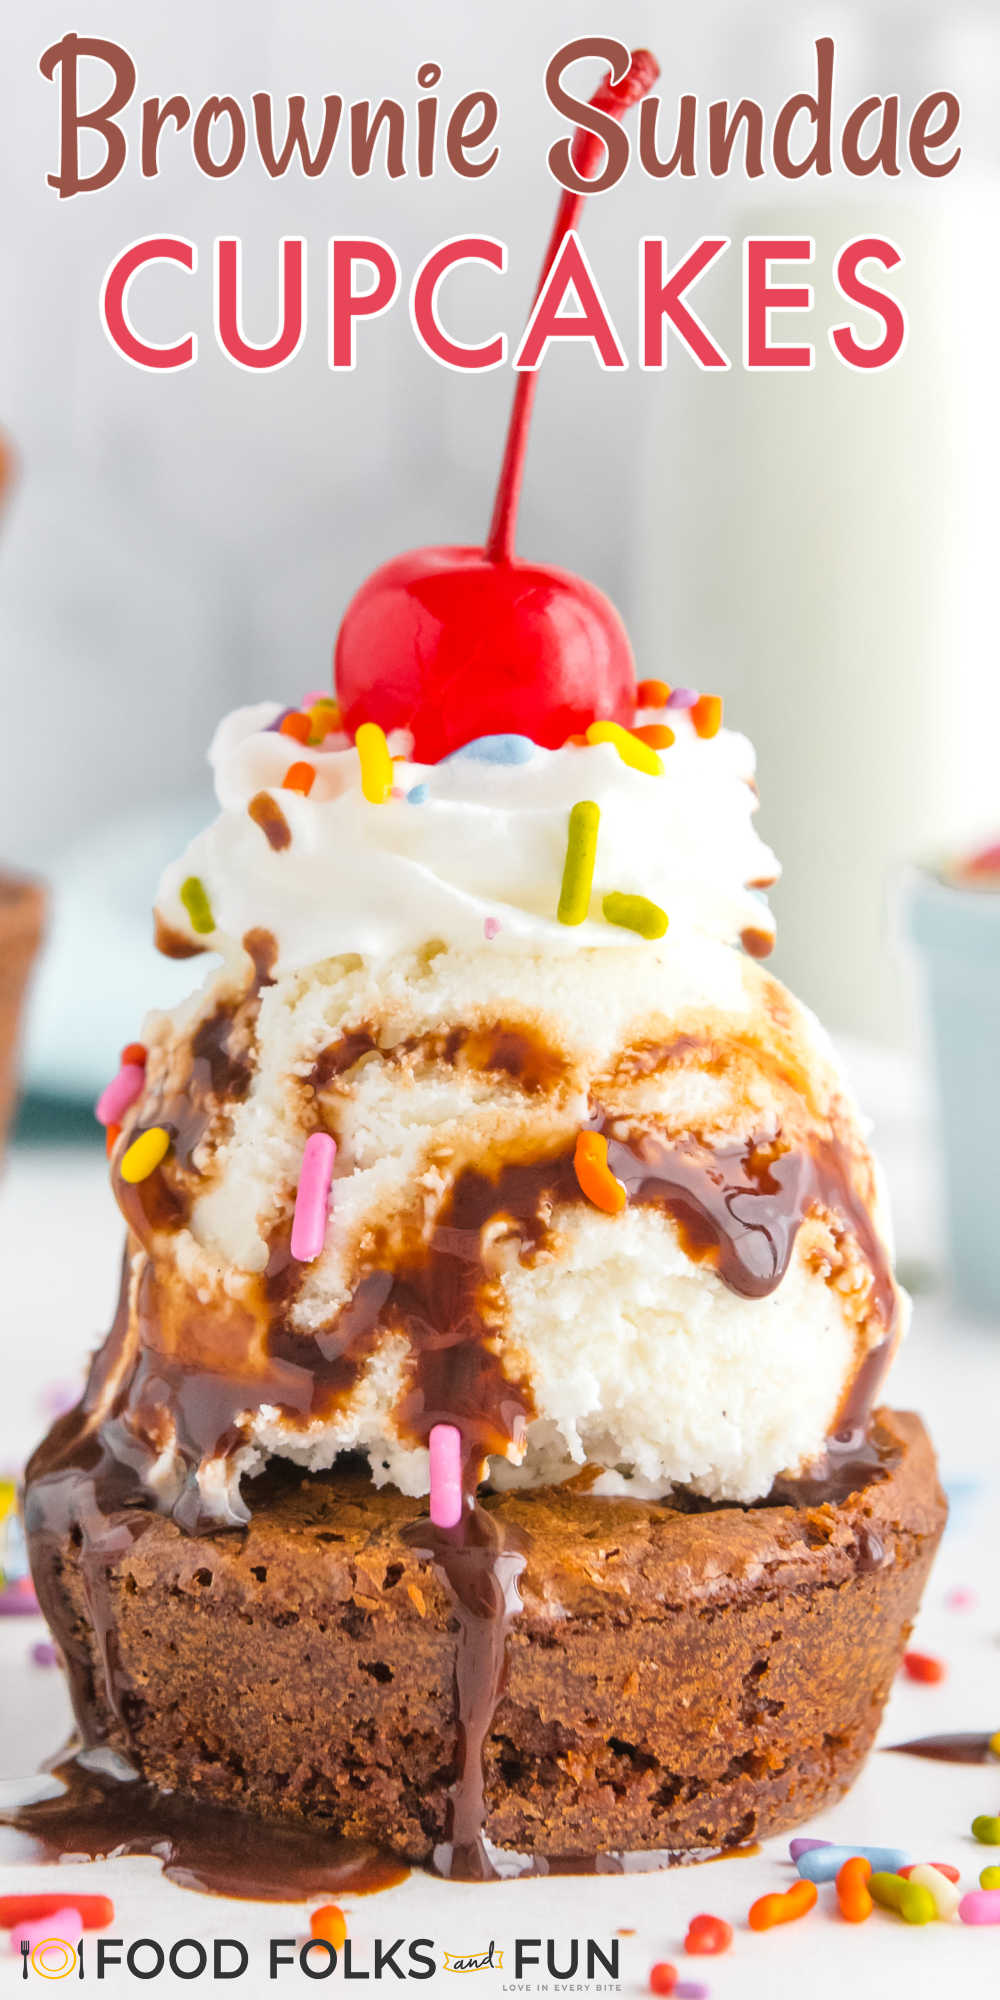 This Brownie Ice Cream Sundae Cupcakes recipe is a party on a plate! Use your favorite ice cream and turn these ice cream cupcakes into an easy summer treat! via @foodfolksandfun